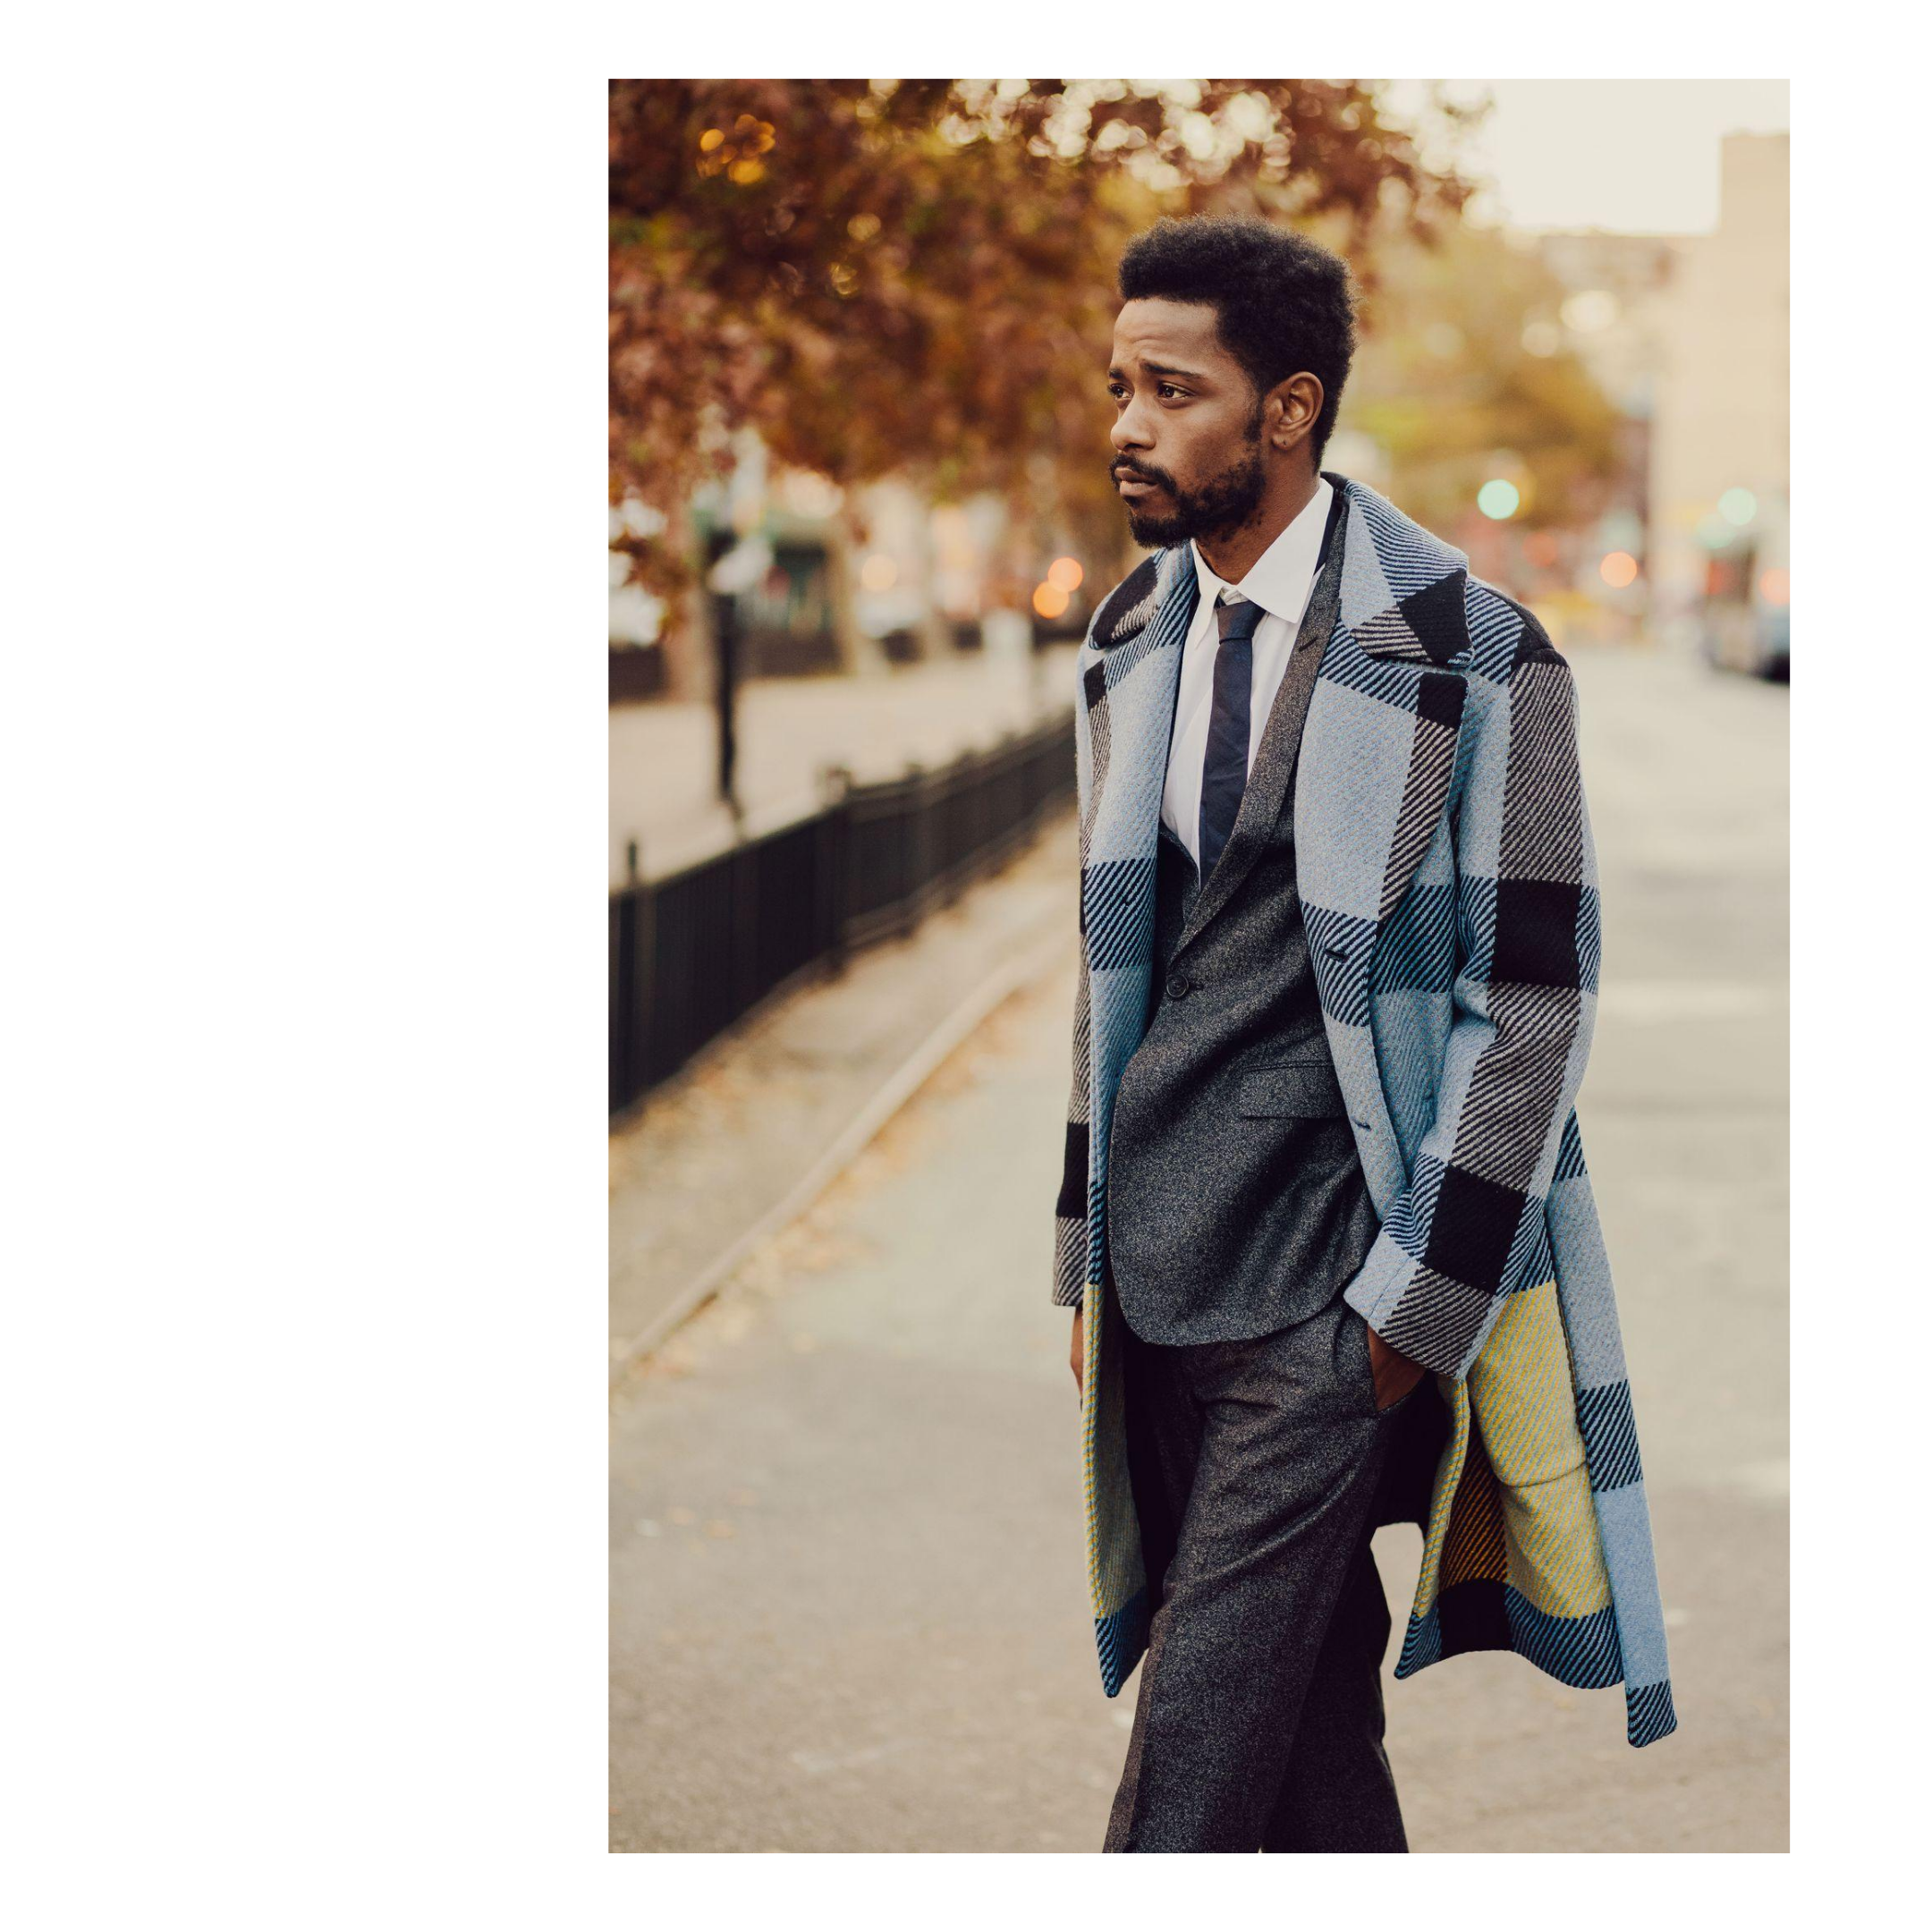 LaKeith Stanfield 